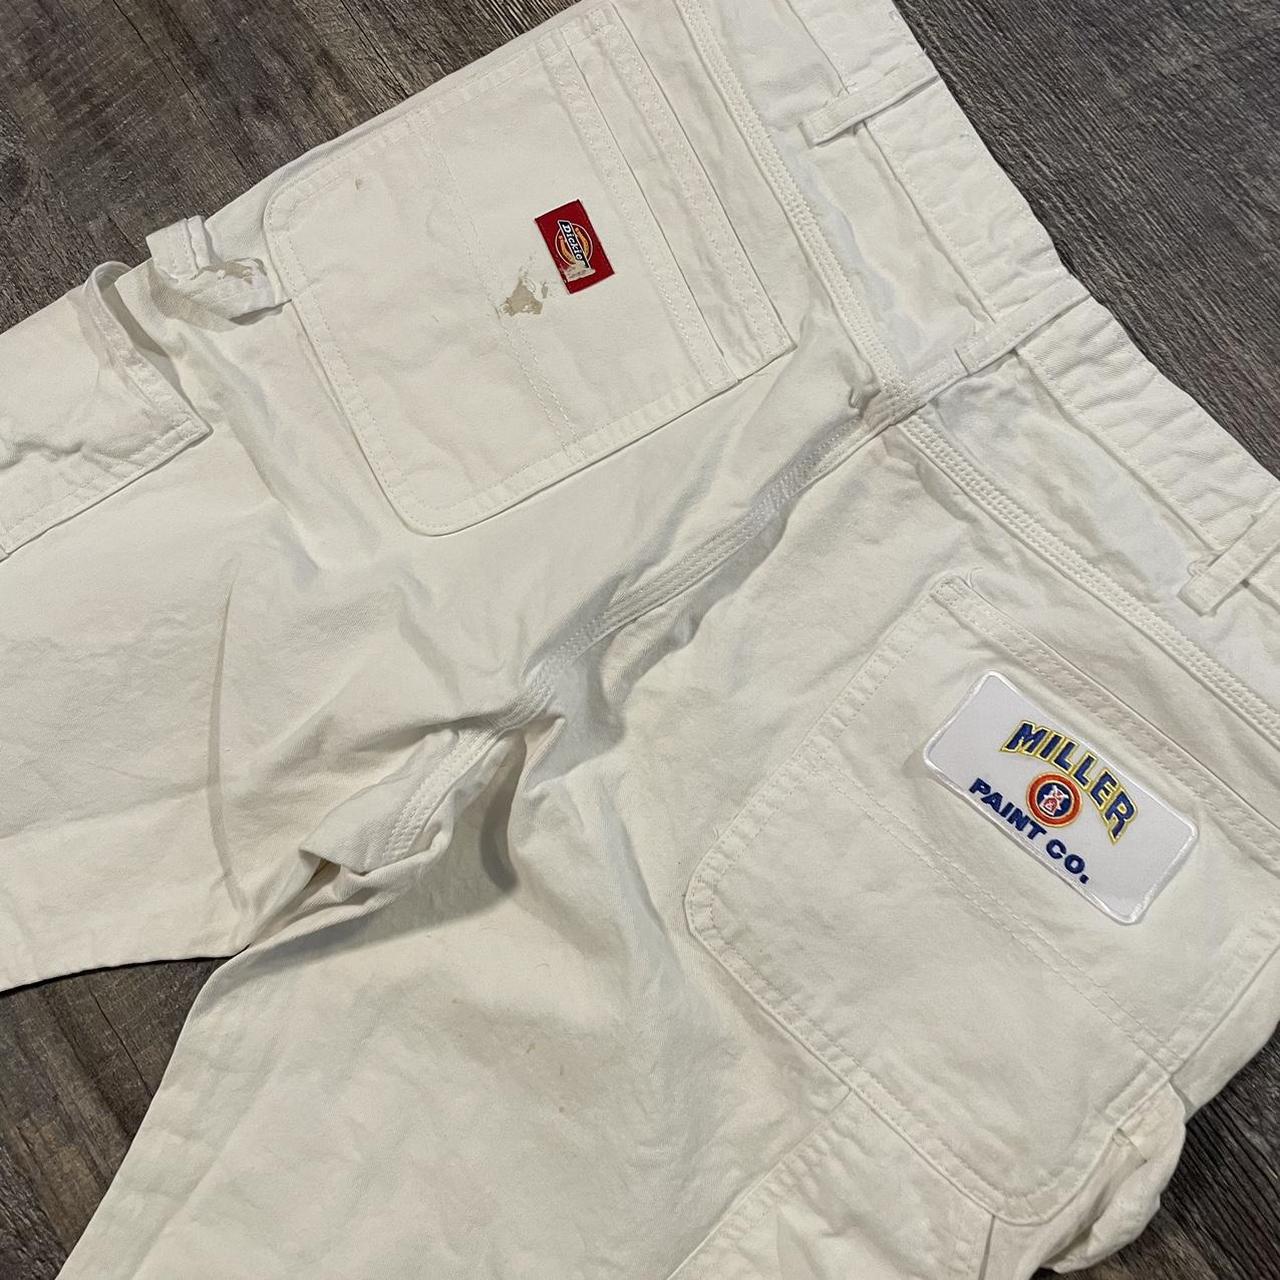 Dickies painter pants, white carpenter pants with